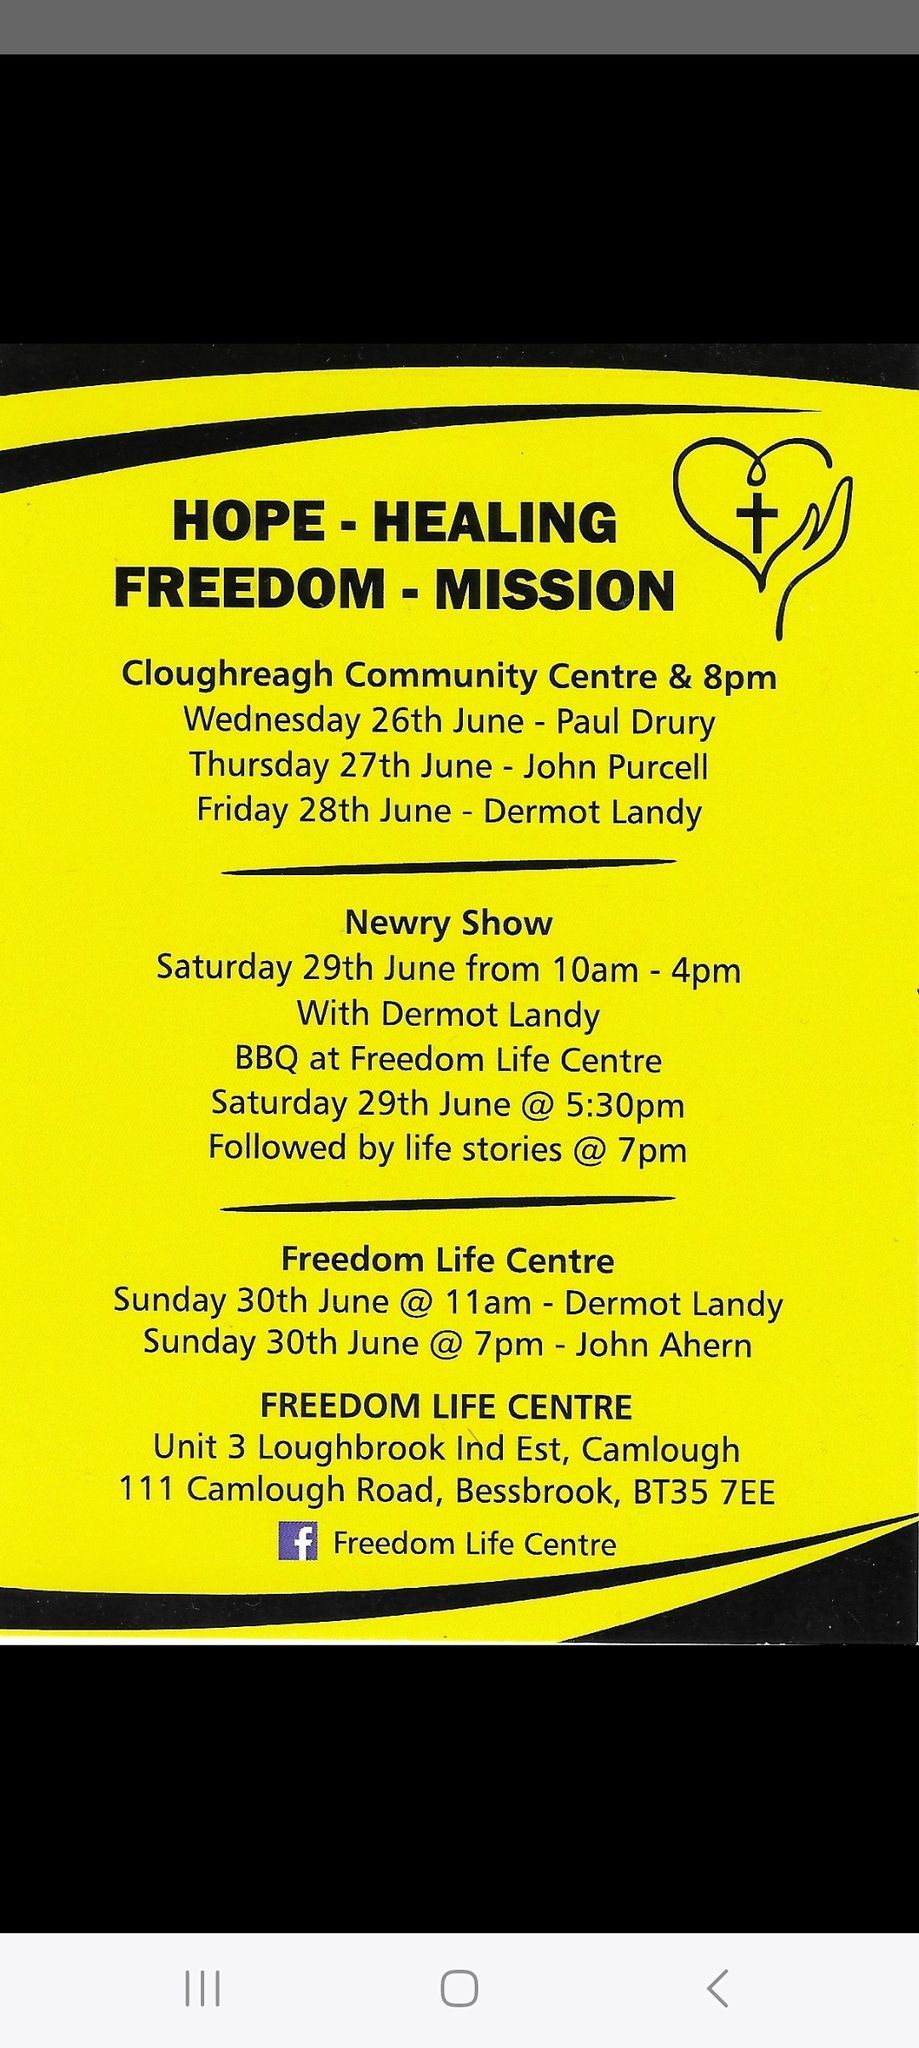 Hope Healing Freedom Mission with Dermot Landy